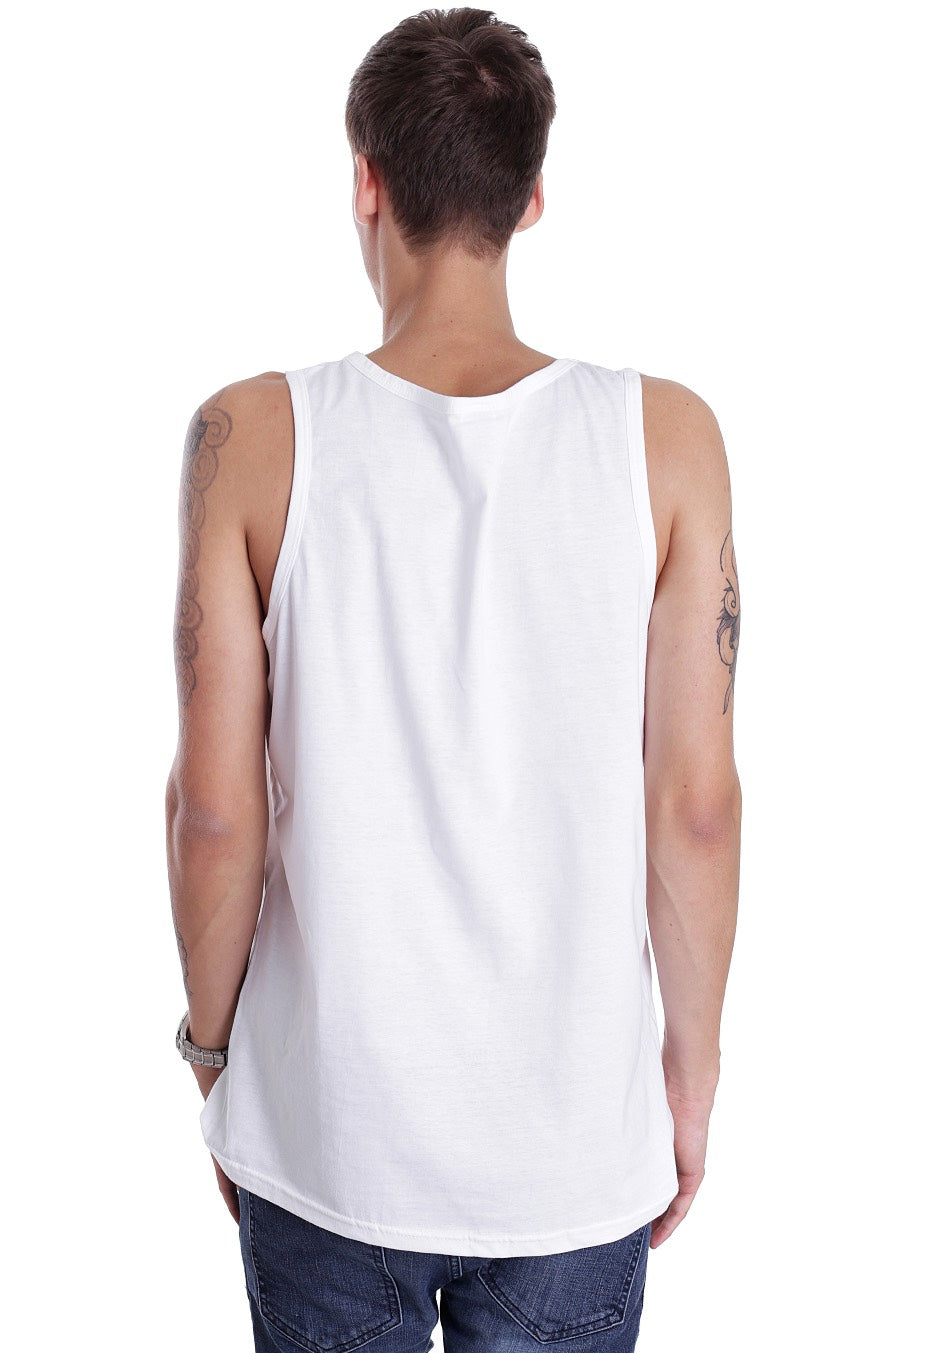 Parkway Drive - Vice Wave White - Tank